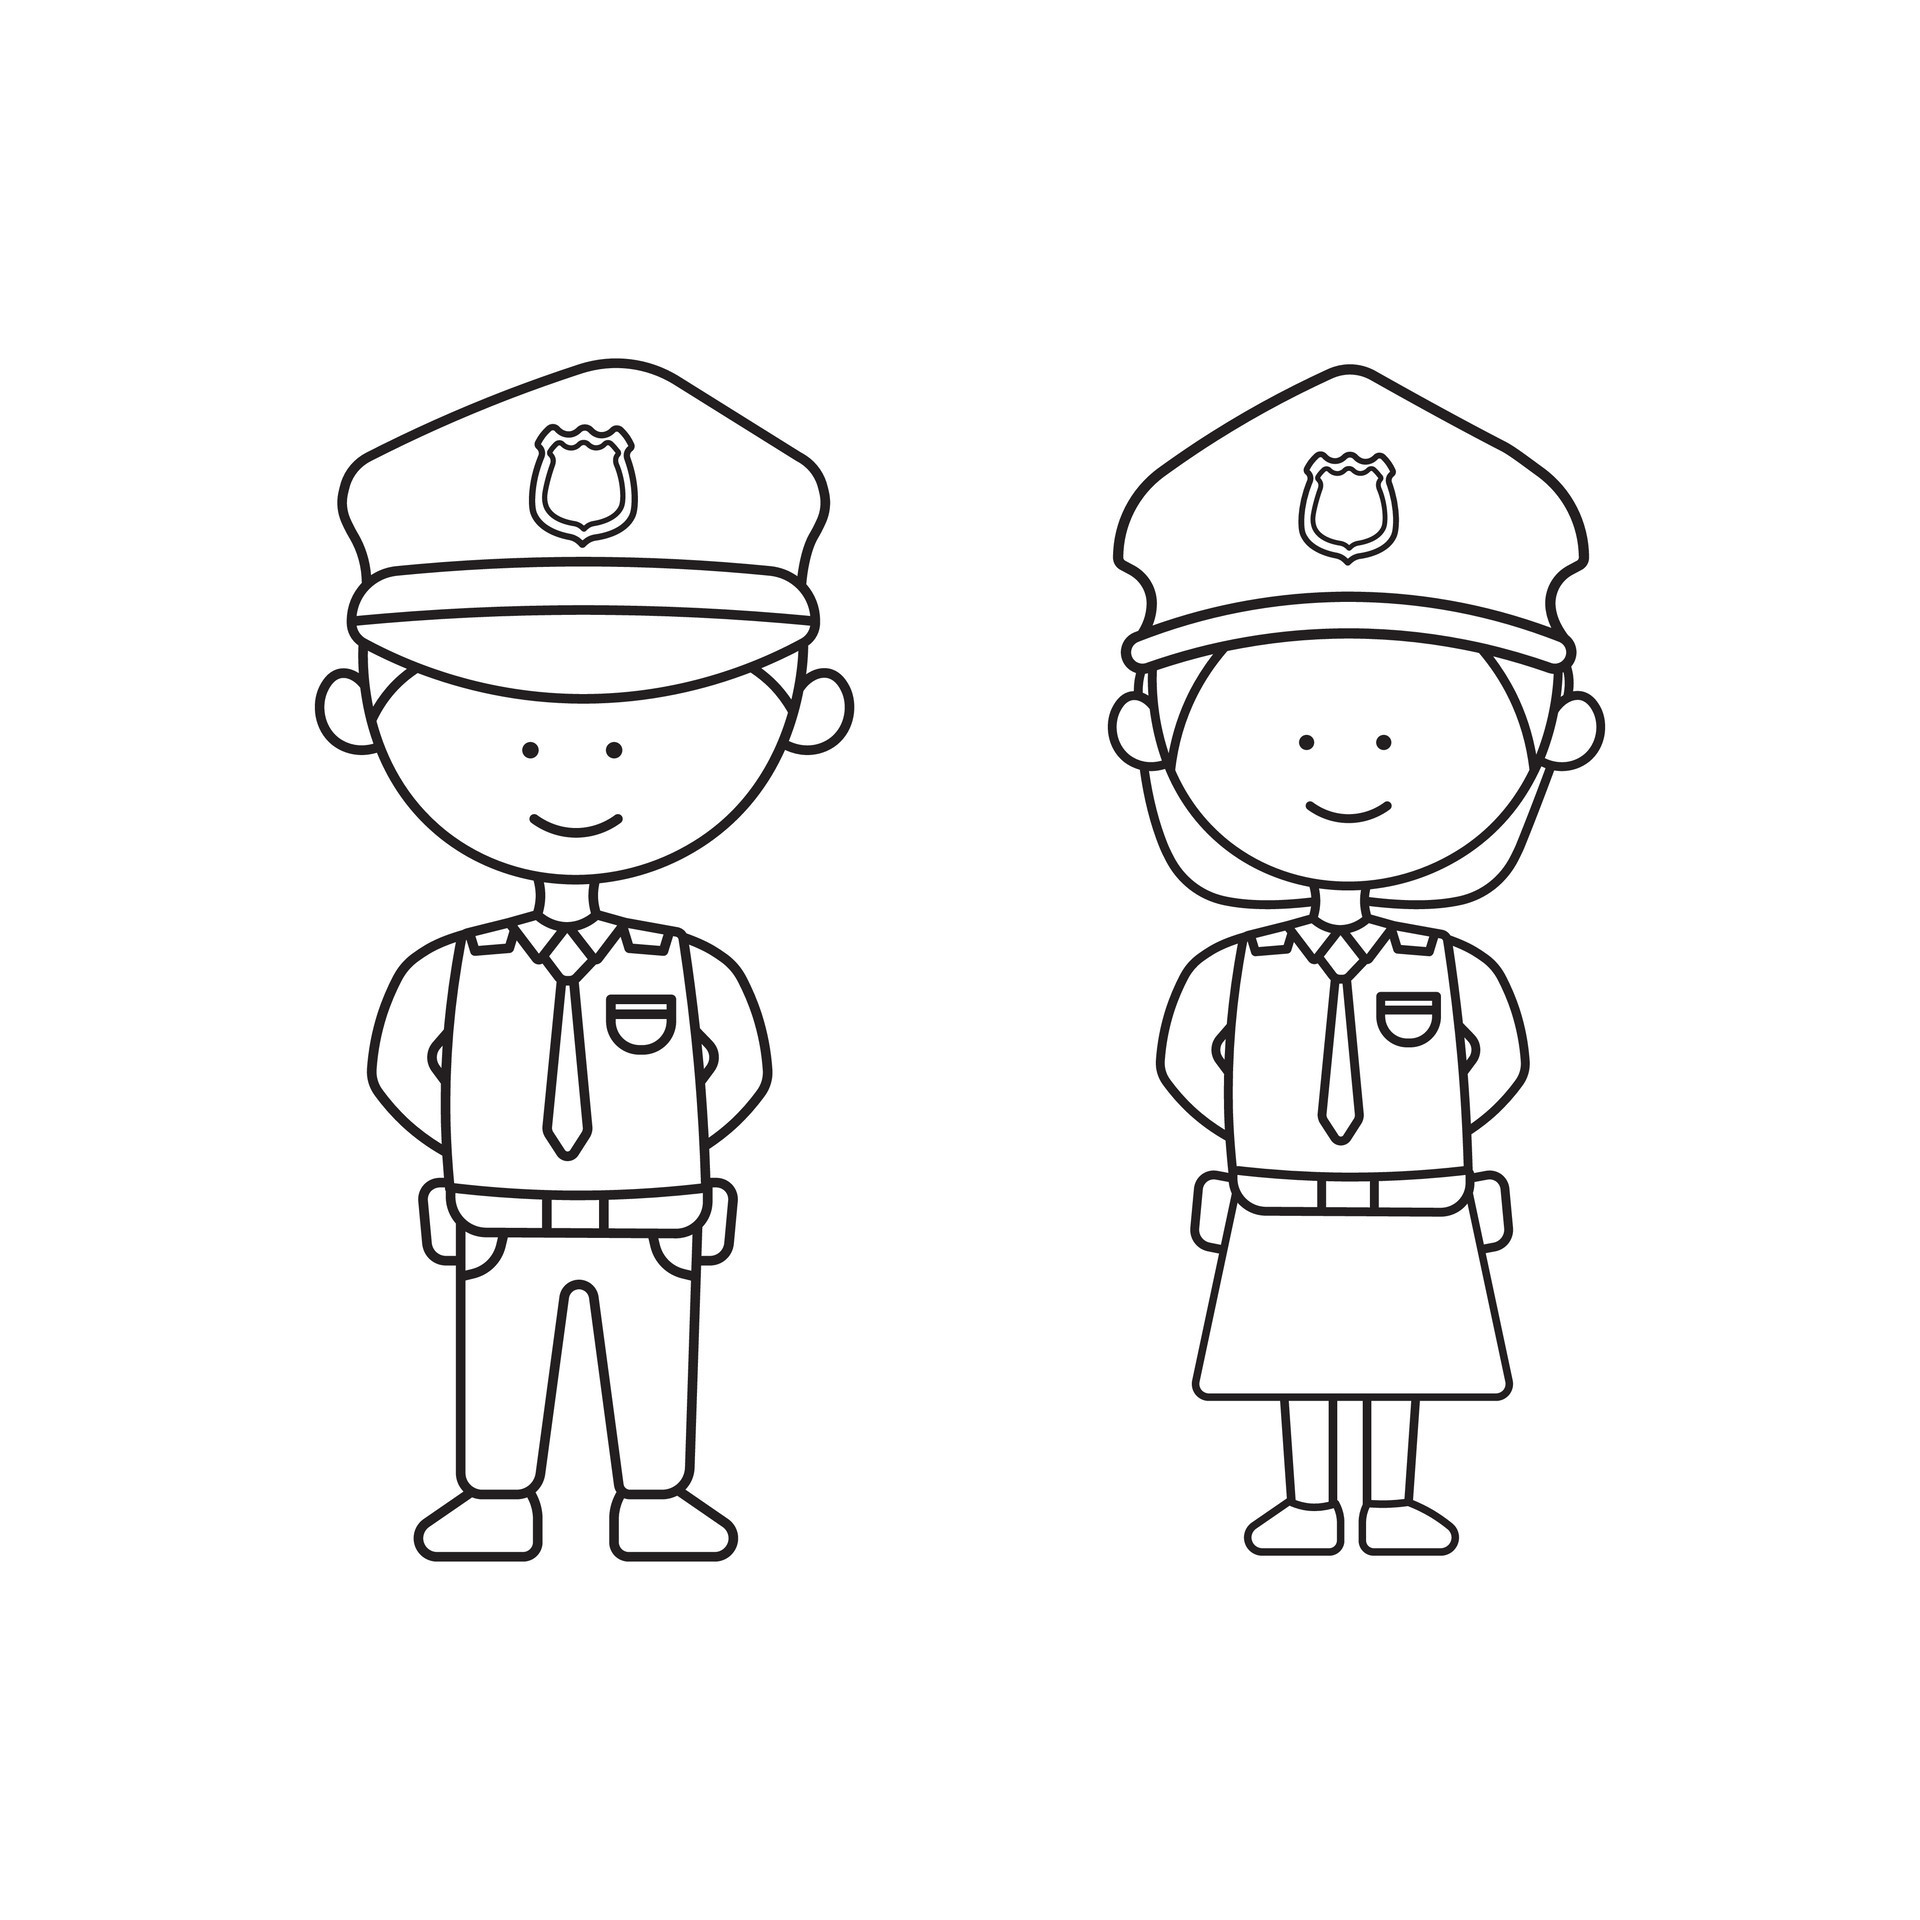 police officer drawings